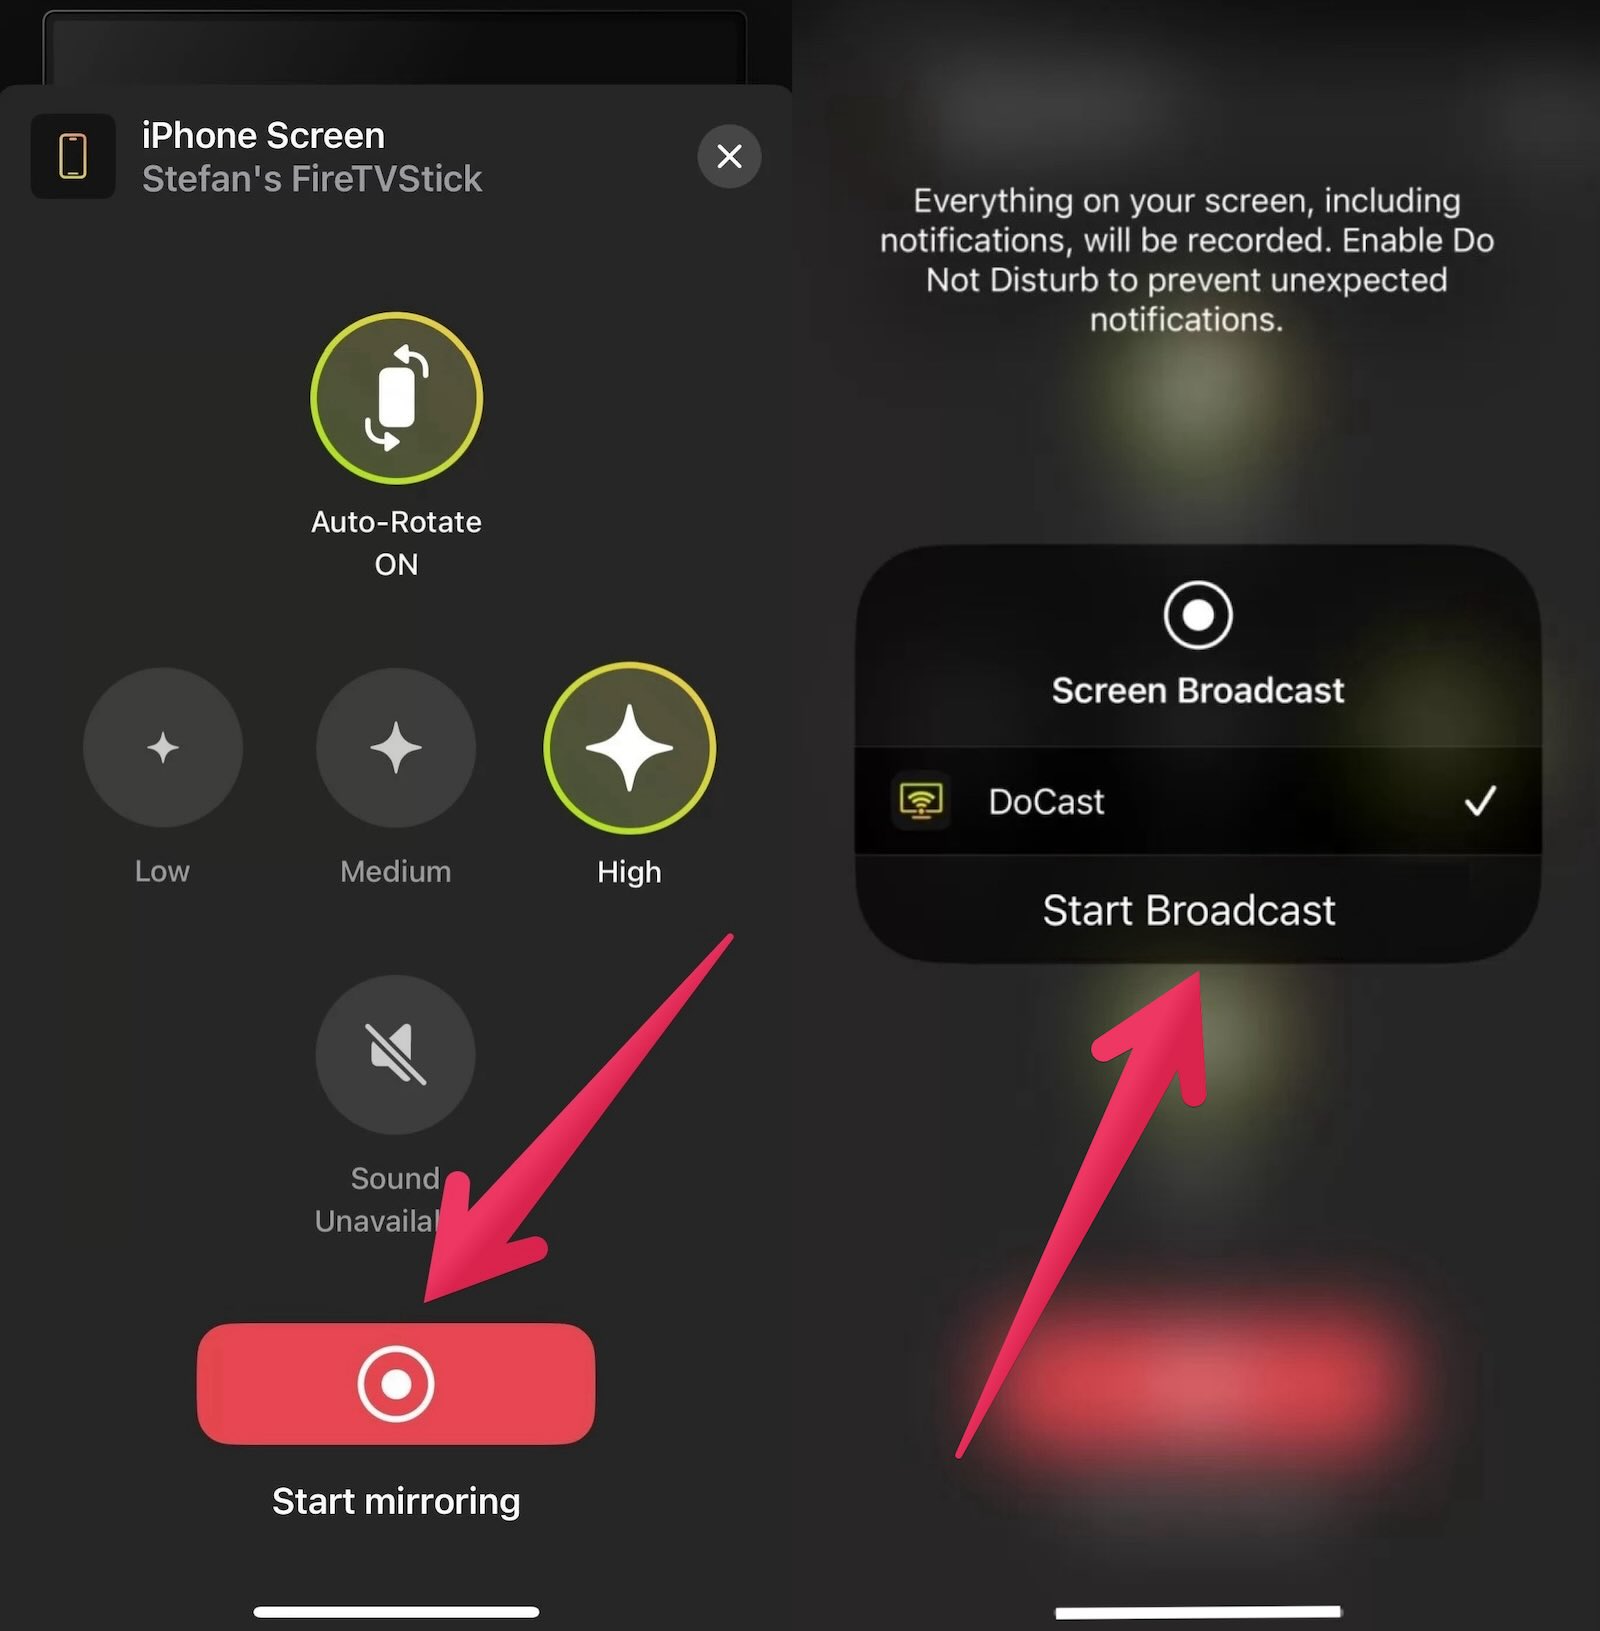 Tap on the Start mirroring and Start Broadcast button in DoCast